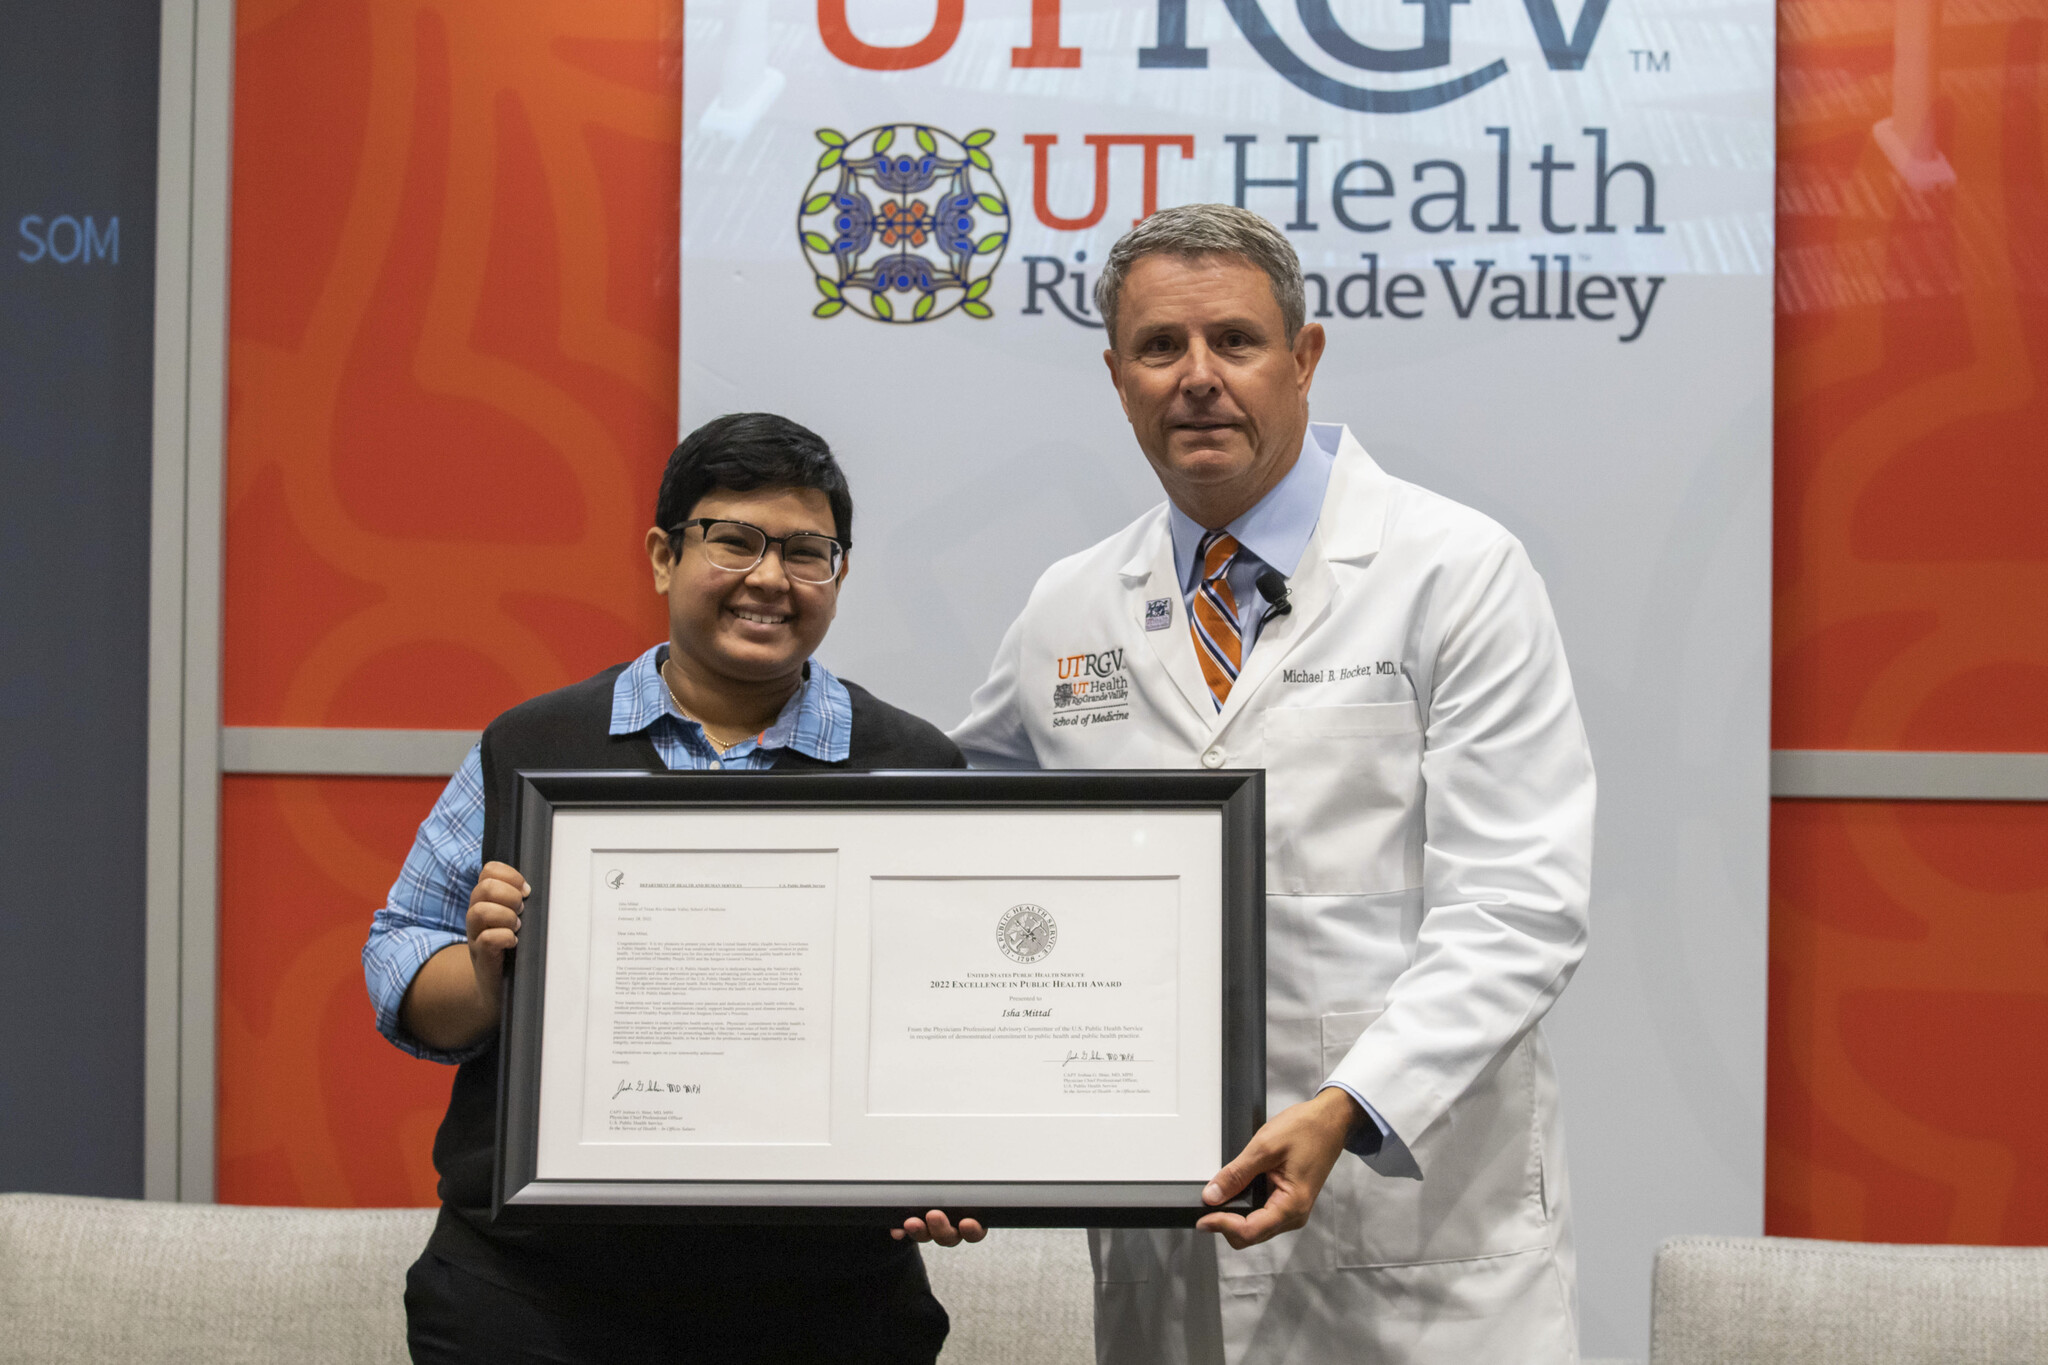 Third-year UTRGV medical student Isha Mittal and Dr. Michael Hocker, dean of the UTRGV School of Medicine, display Mittal’s recent U.S. Public Health Service Excellence in Public Health Award. (Photo by Raul Gonzalez)